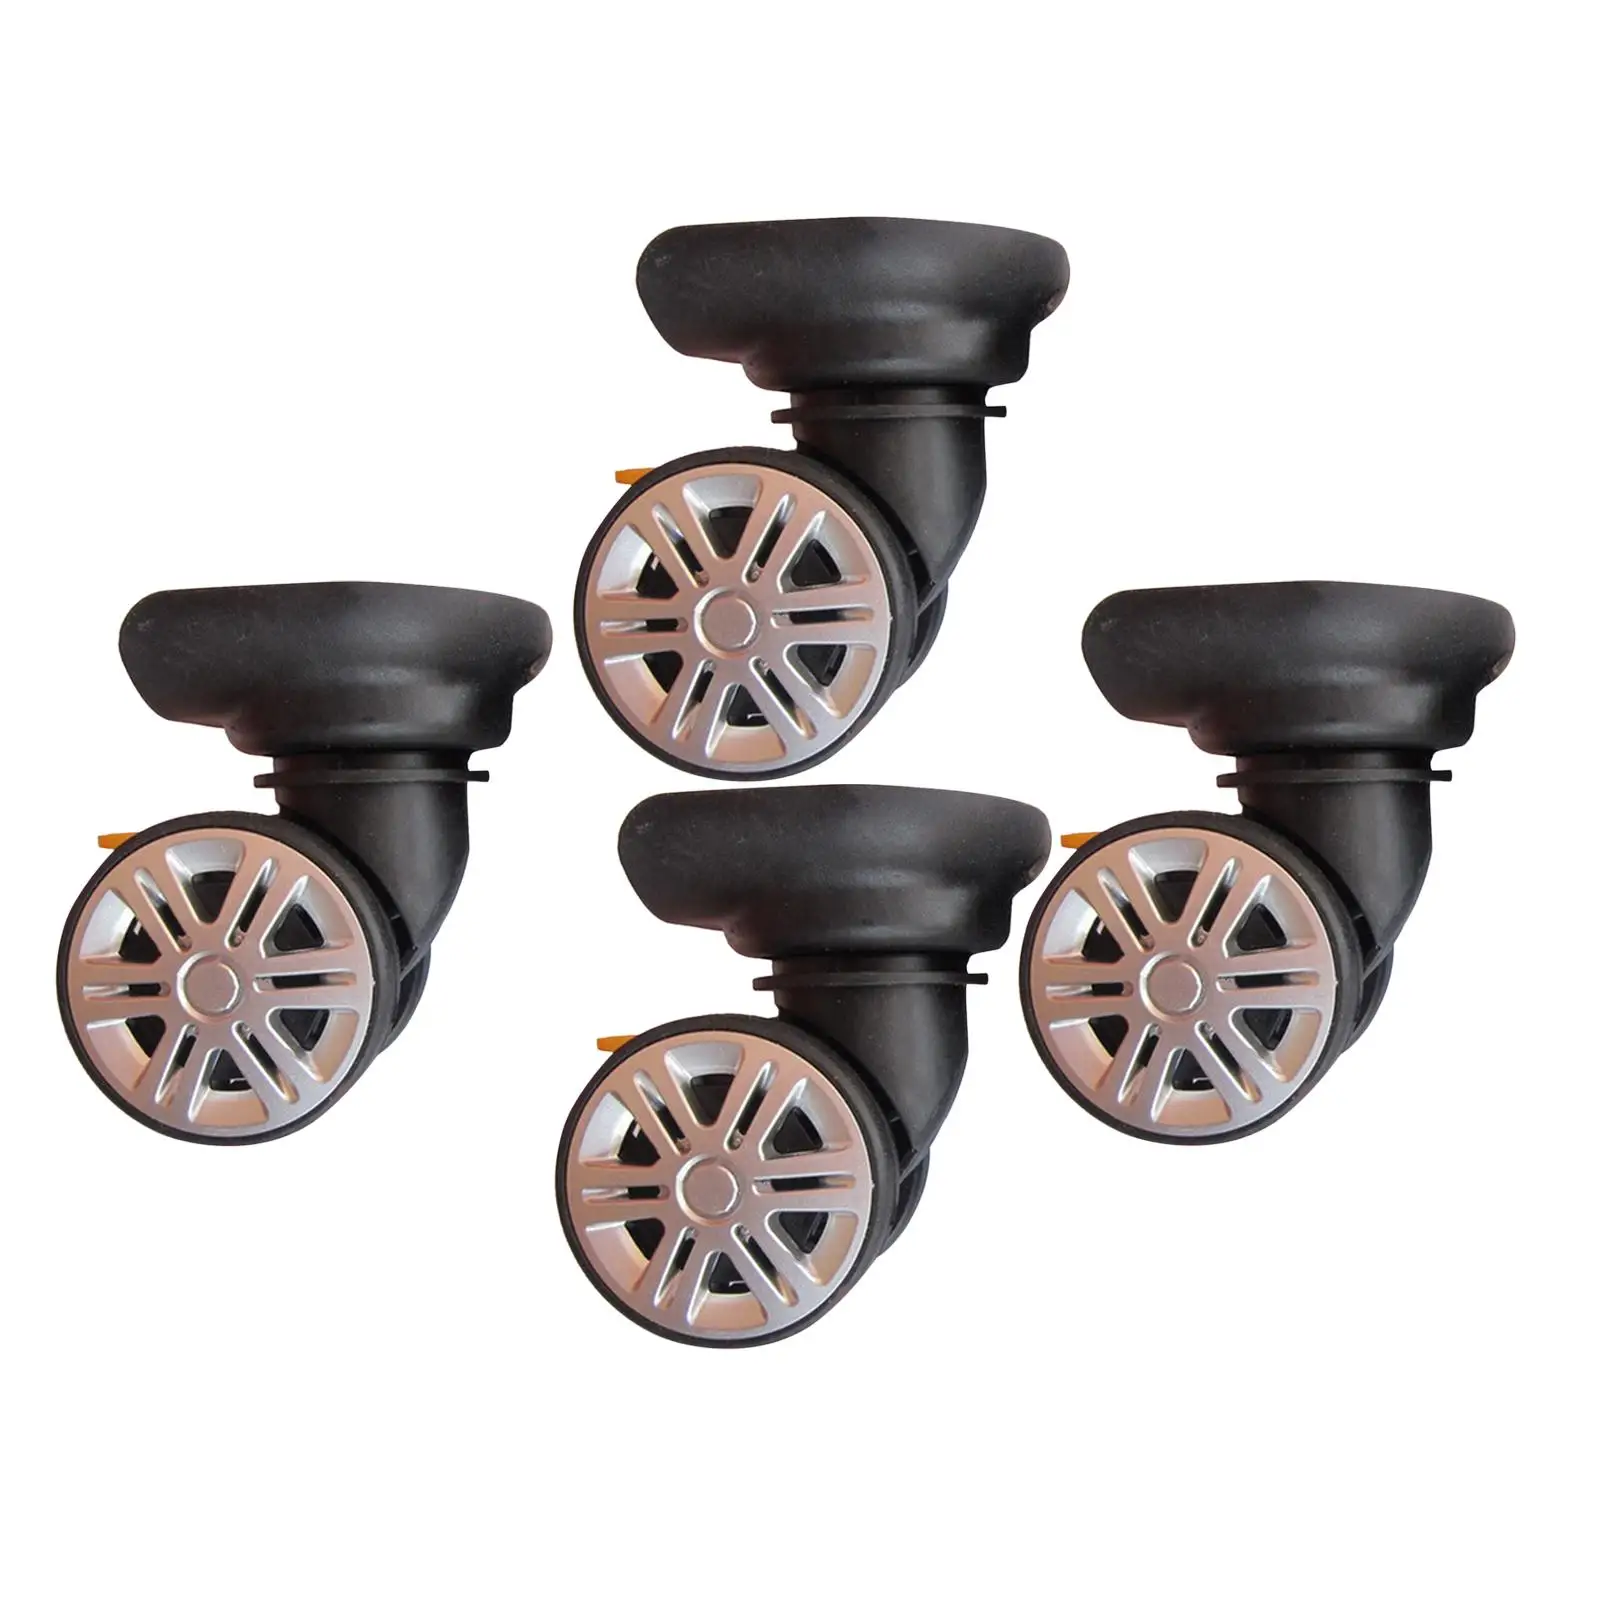 4x Luggage Suitcase Wheels Trolley Replacement Wheels for Trolley Suitcases